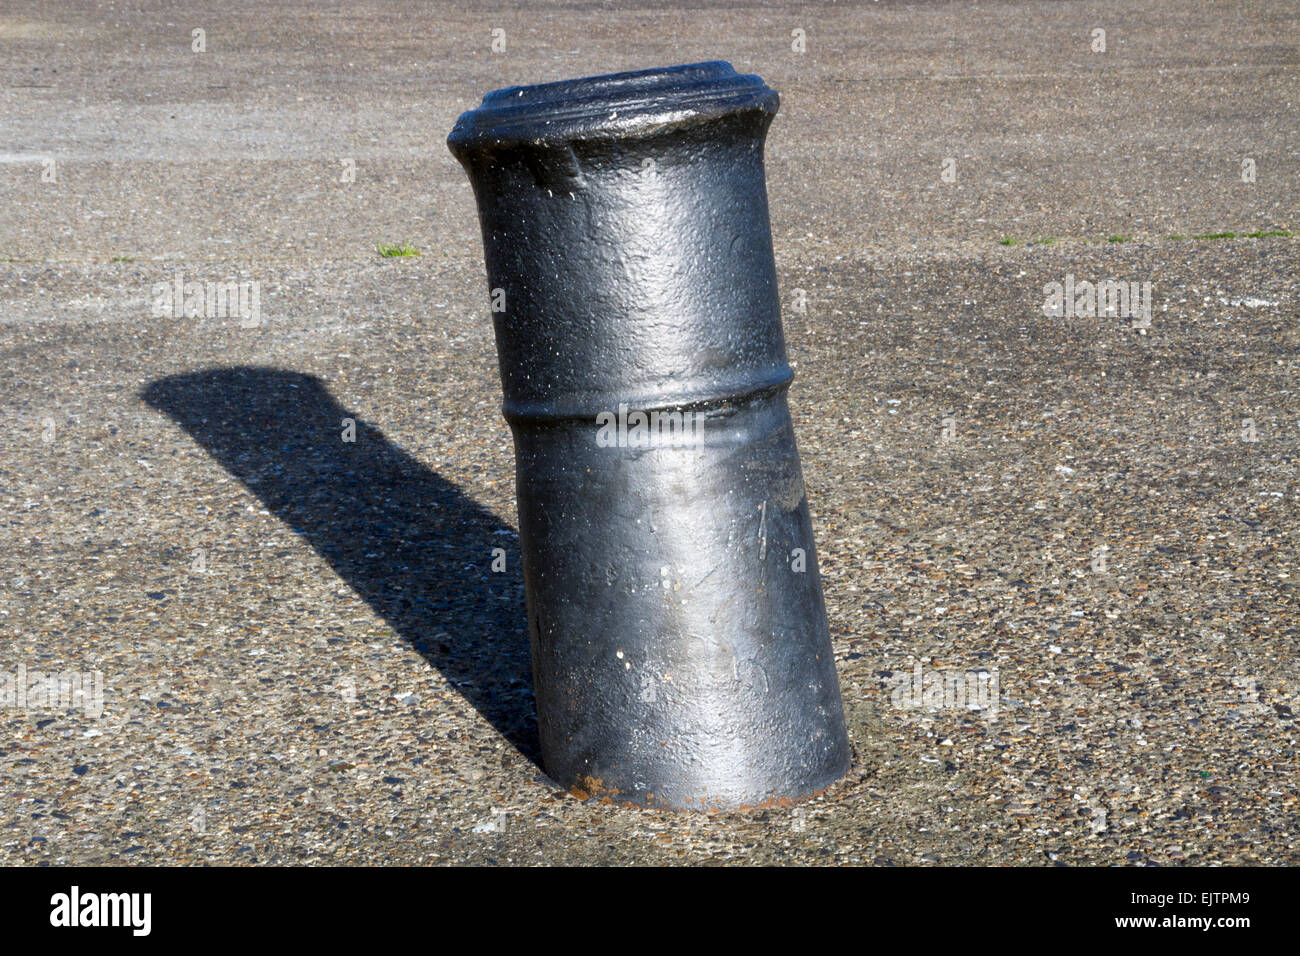 Naval cannon upended and used as bollard, old docks, East India Dock Basin, London Stock Photo